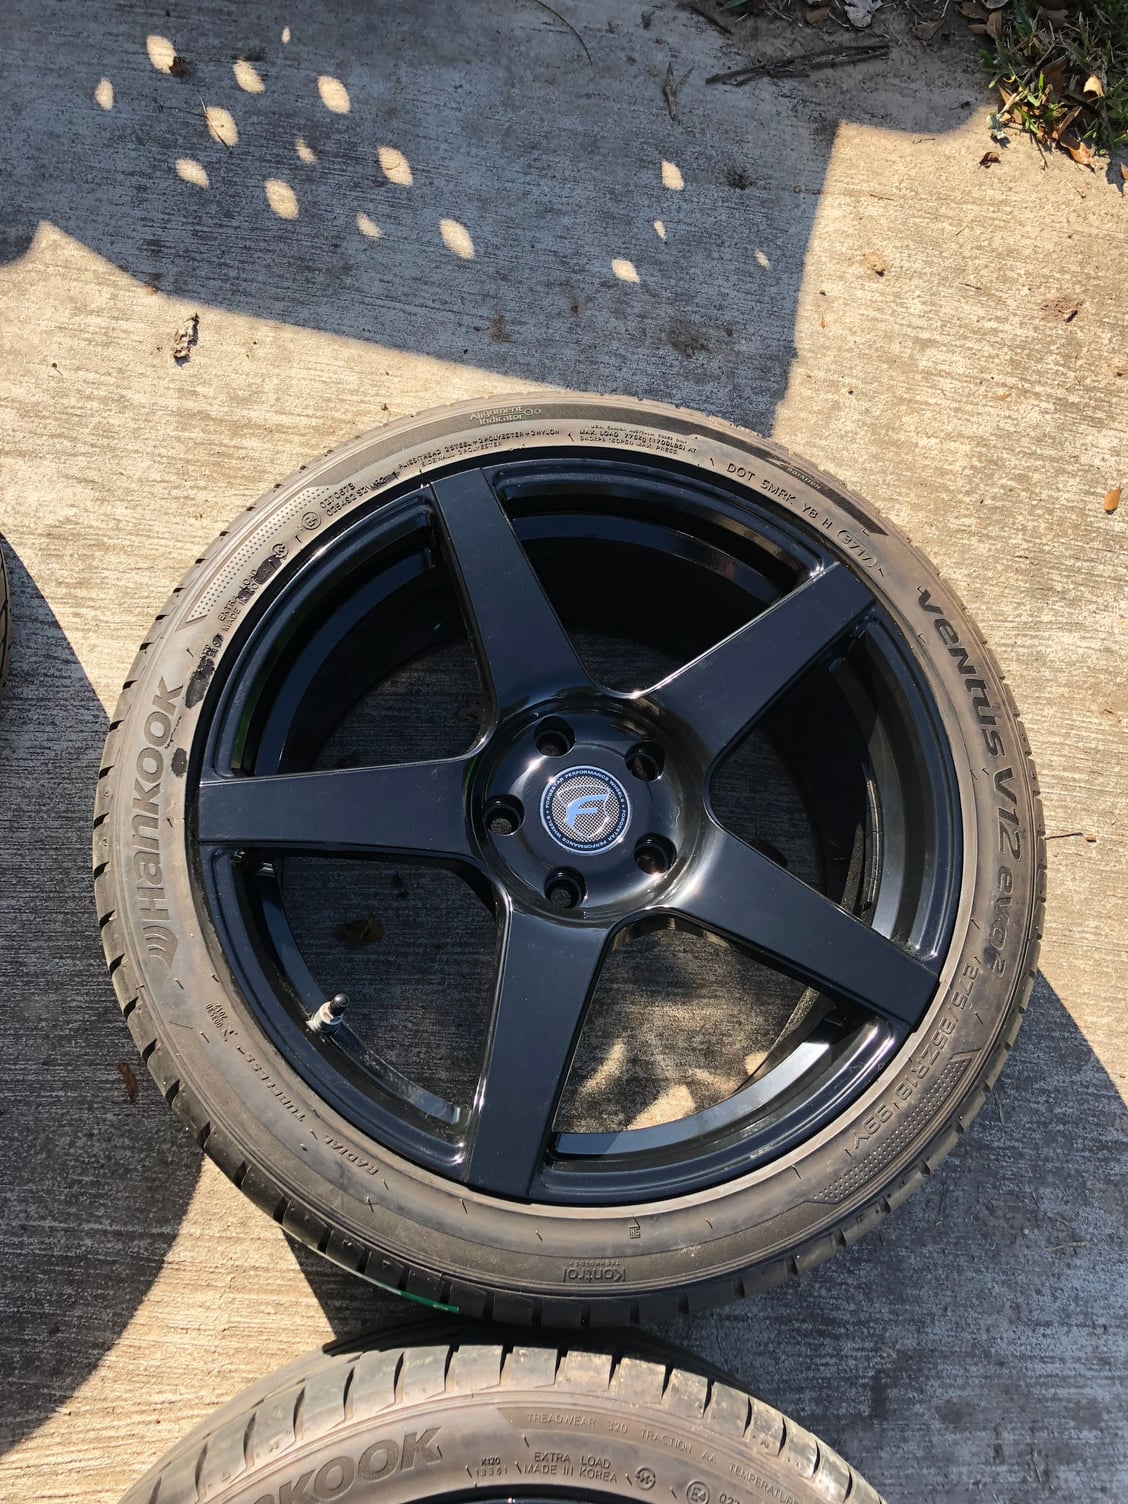 Wheels and Tires/Axles - C63 204 tire/rim setup - Forgestar CF5 staggered 18's plus tires & sensors- like new - Used - Houston, TX 77056, United States